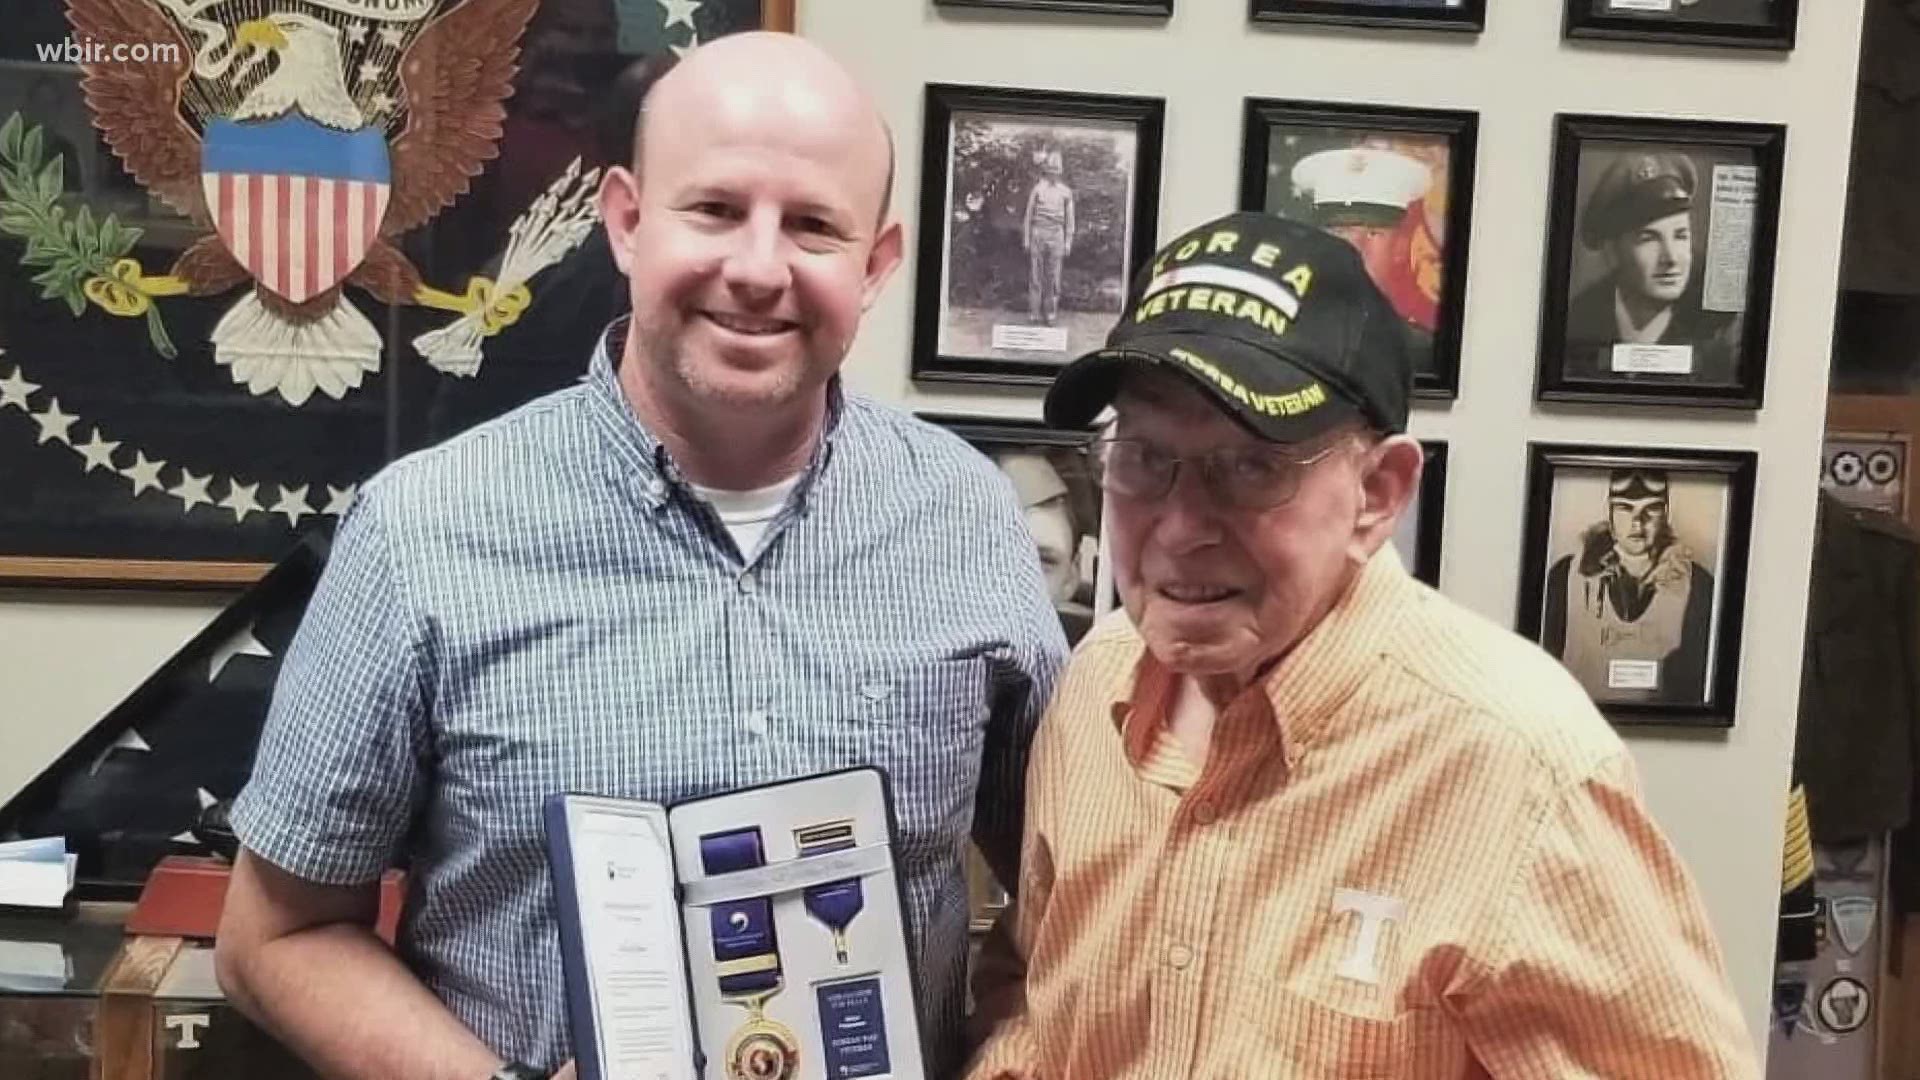 A nationwide effort is underway to ensure veterans of the war in Korea receive a medal from South Korea for their service.